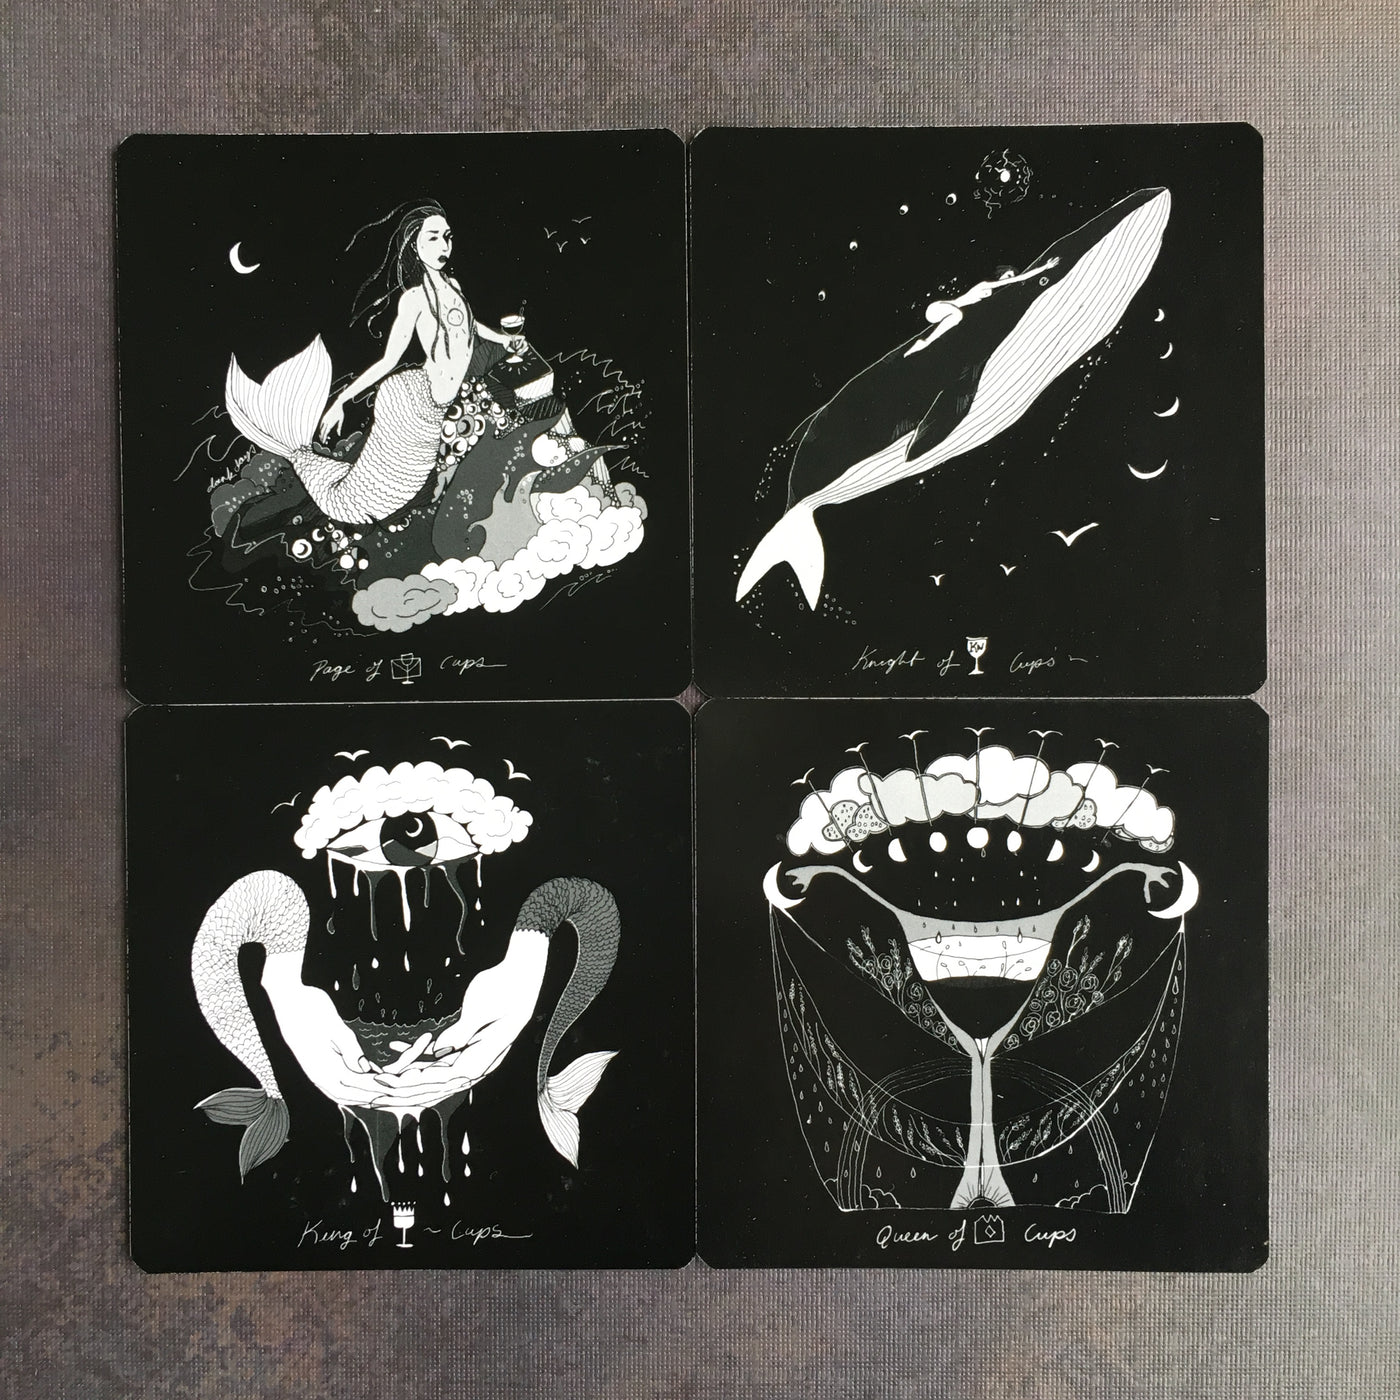 The Cups court cards from the Dark Days indie Tarot deck